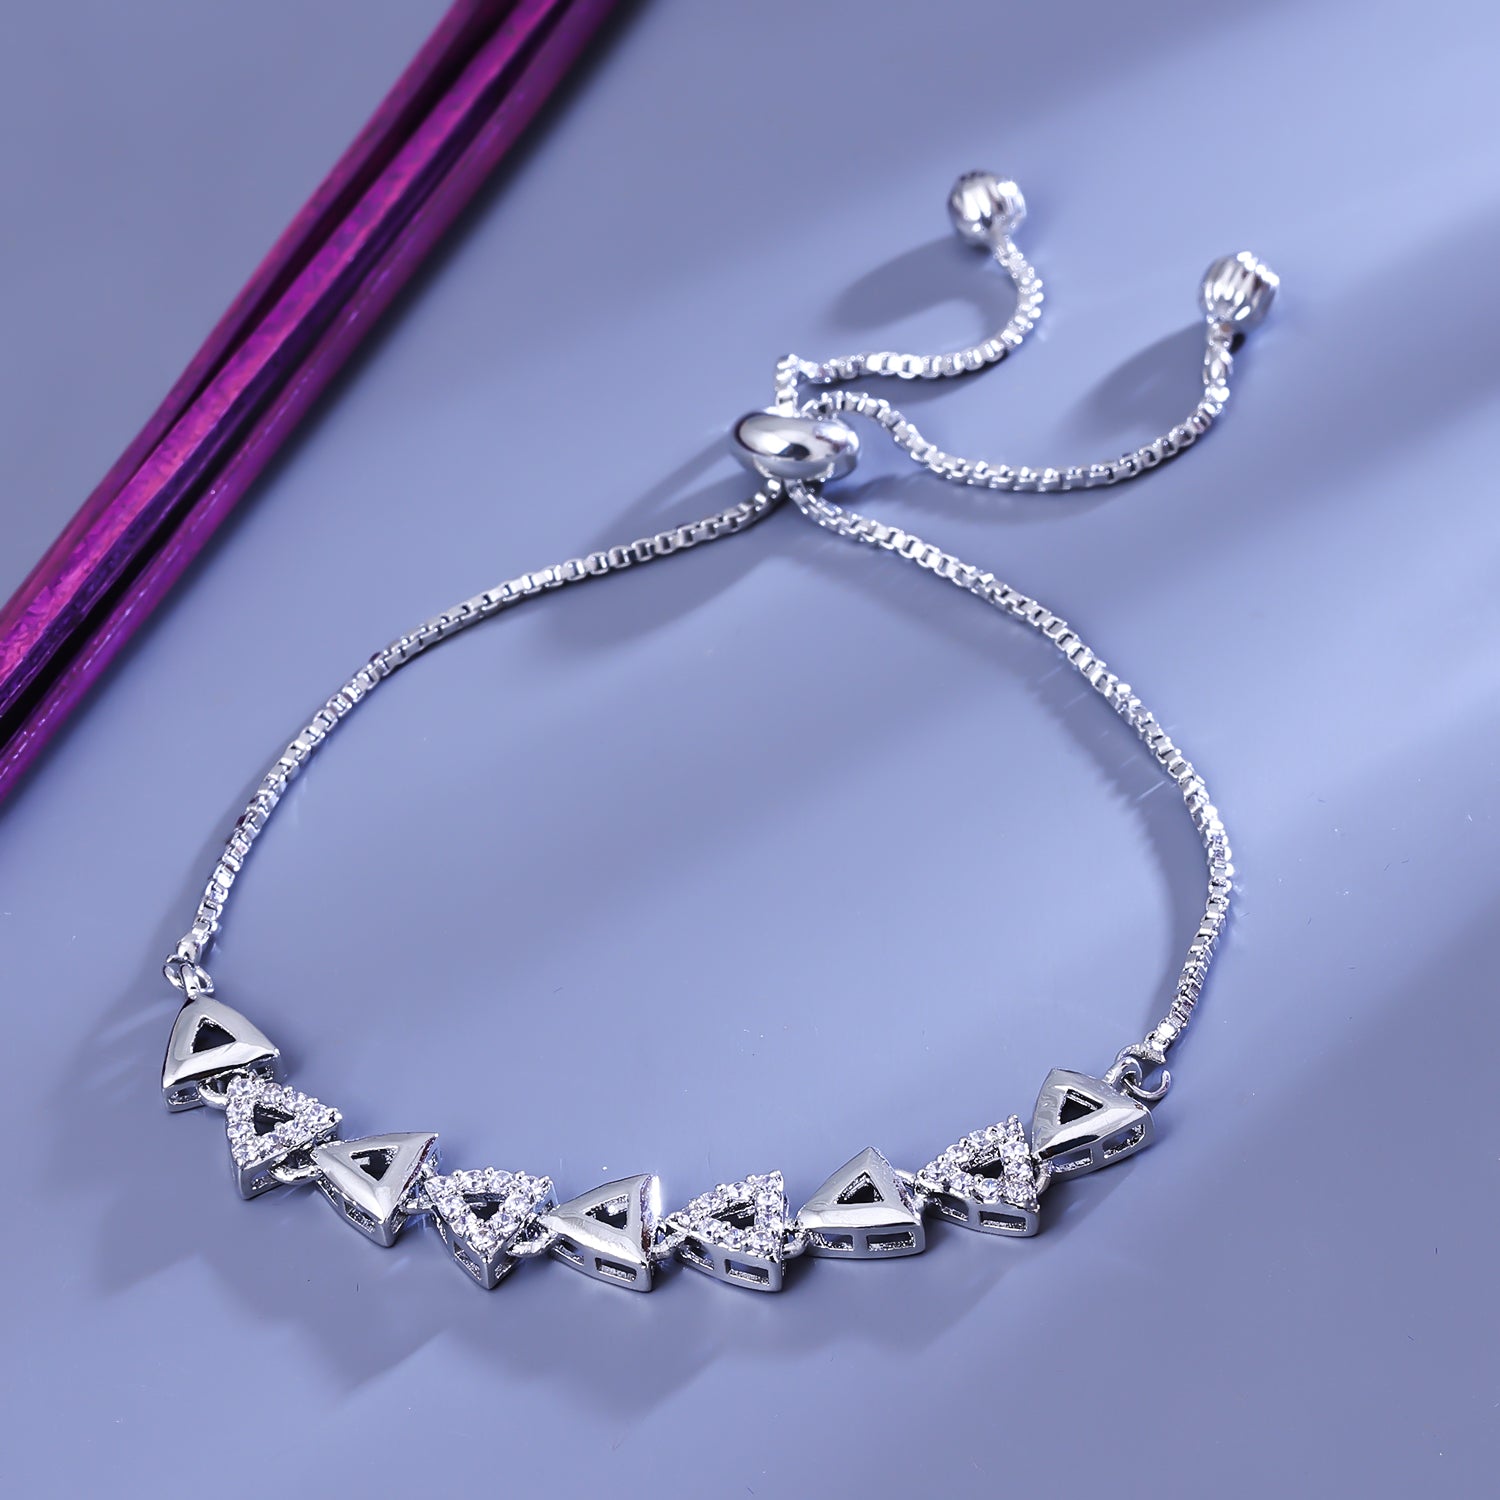 Cushion Link Chain Bracelet in Sterling Silver with Blue Sapphires, 9.5mm |  David Yurman